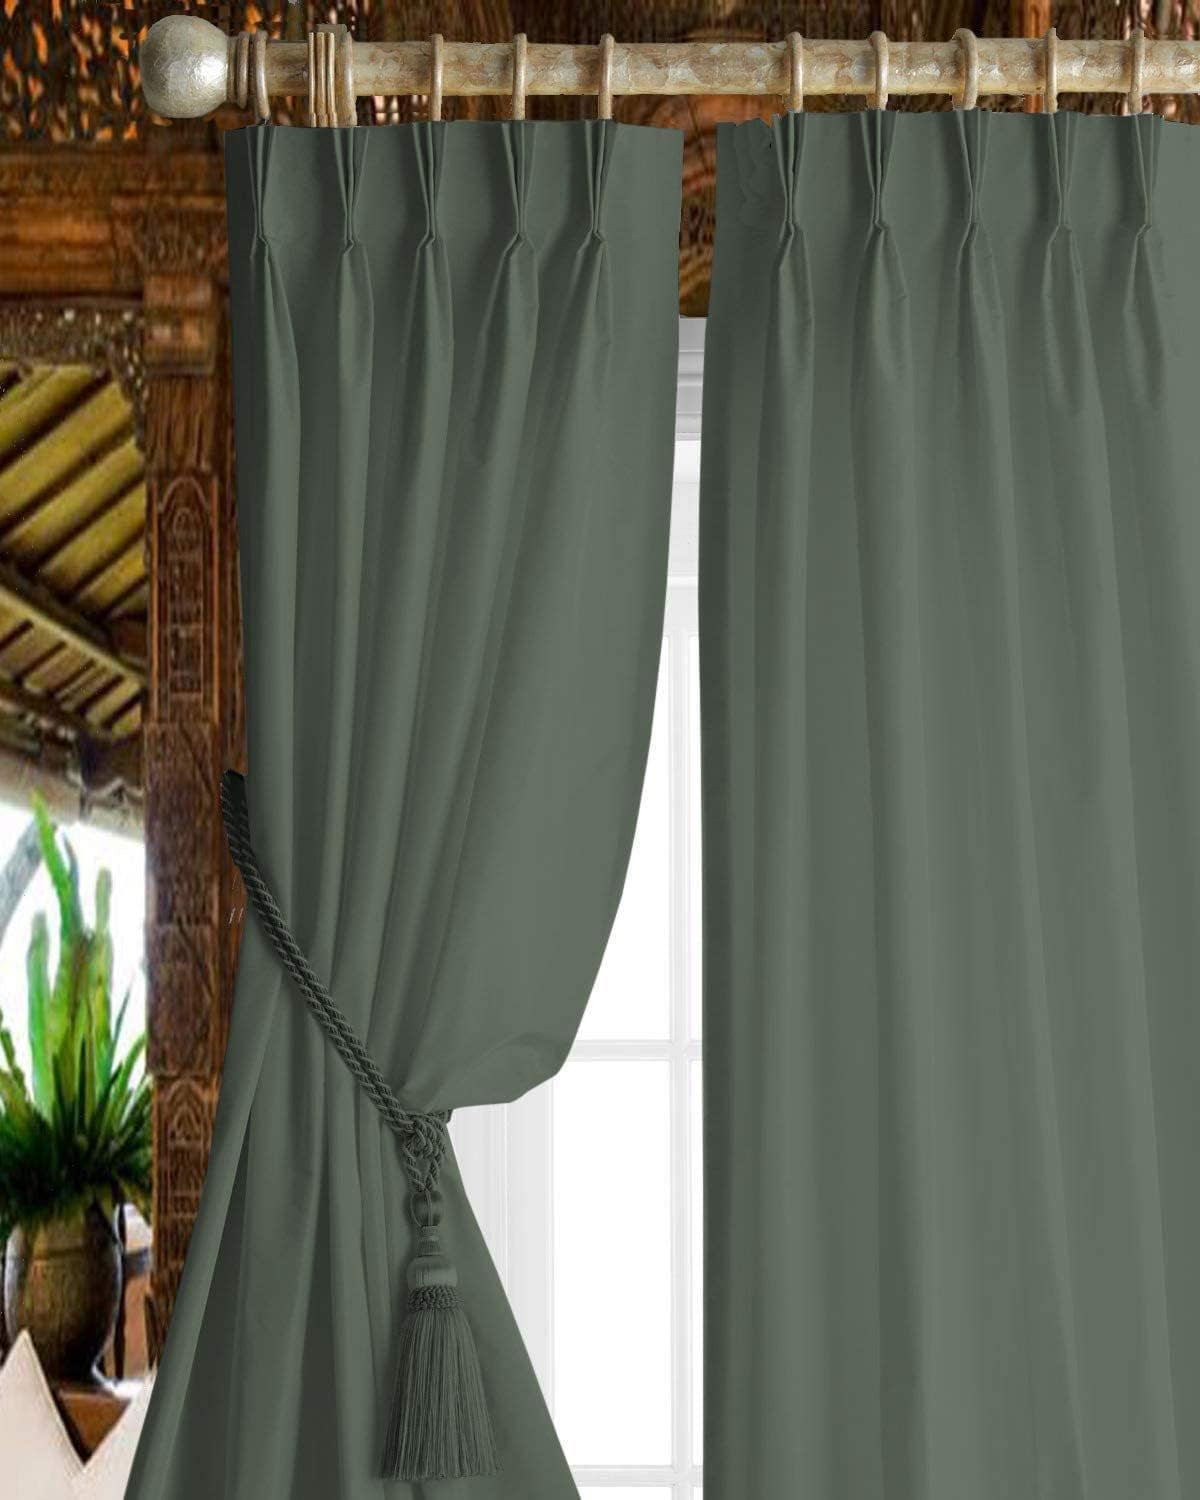 Magic Drapes Pinch Pleated Curtains Triple Pinch Pleat Drapes with Tiebacks & Hooks Blackout Thermal Room Darkening Window Curtains for Living Room, Bedroom, Hall W(26"+26") L45 (2 Panels, Royal Blue)  Magic Drapes Solid - Dark Grey 42"X 63" 